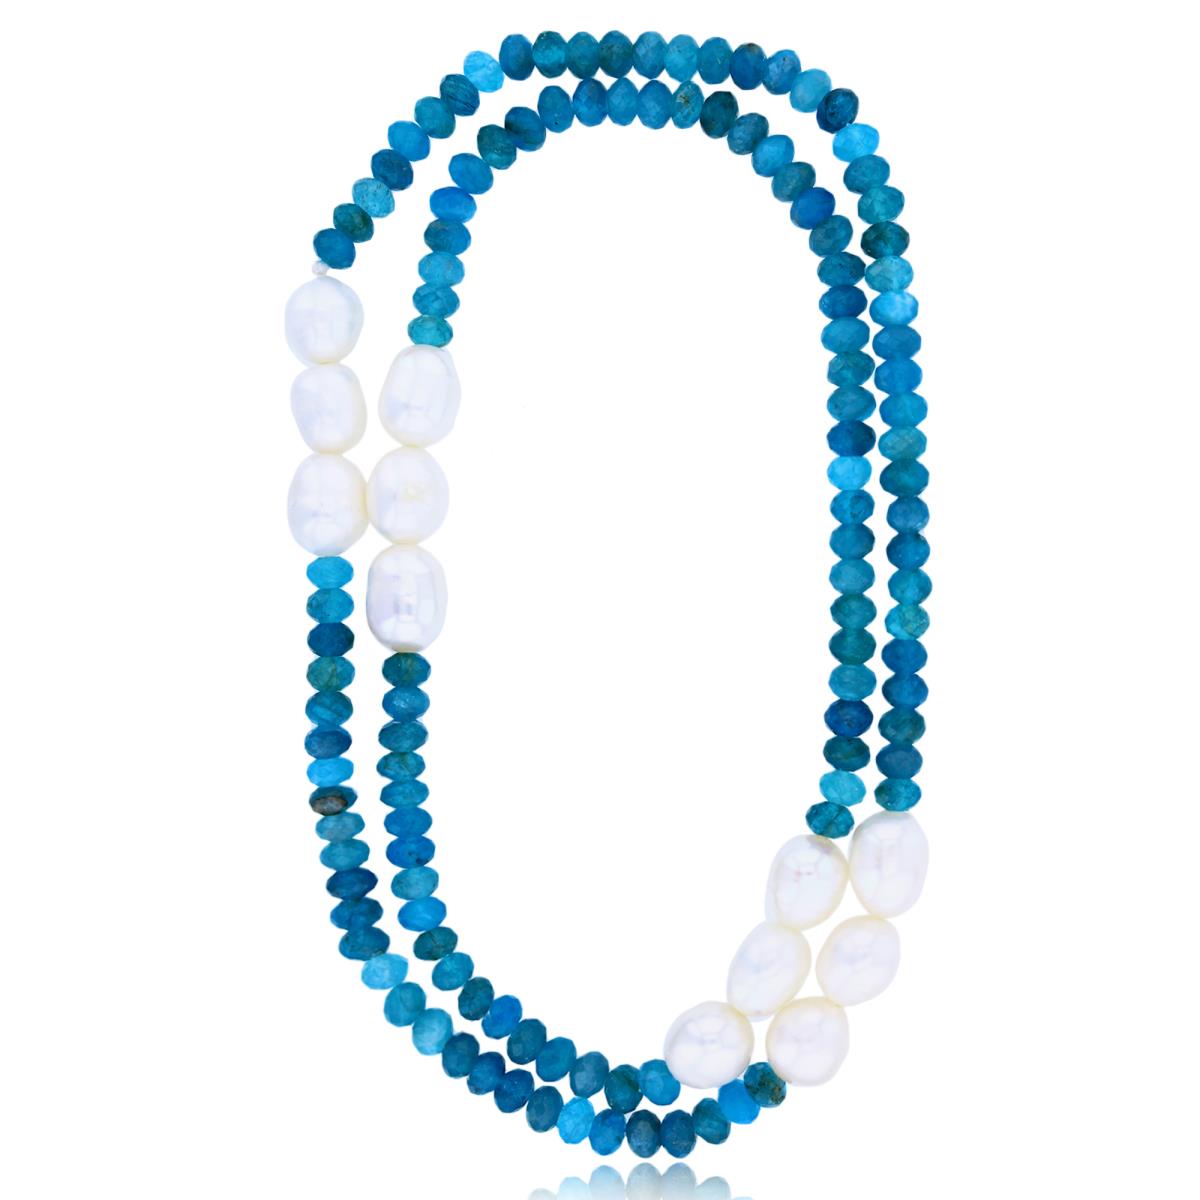 7-8mm Oval FWP & 4x5mm Apatite 42" Necklace